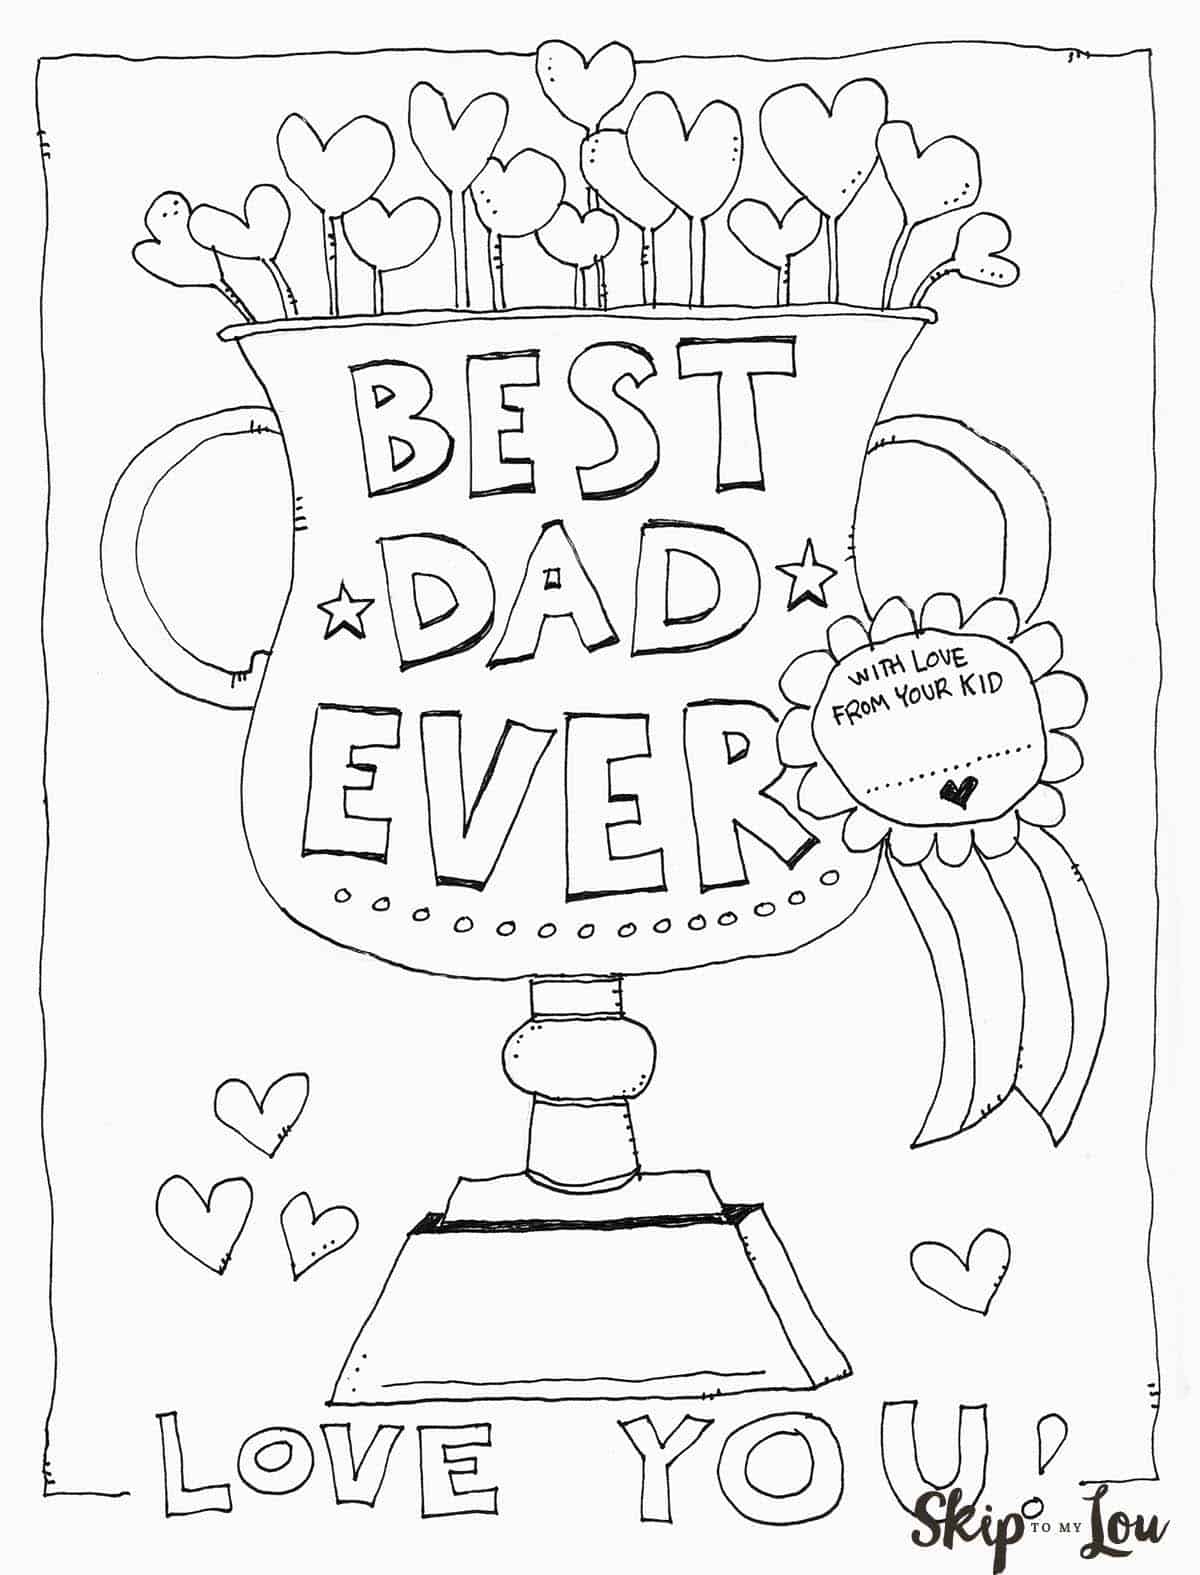 dad-coloring-page-for-the-best-dad-skip-to-my-lou